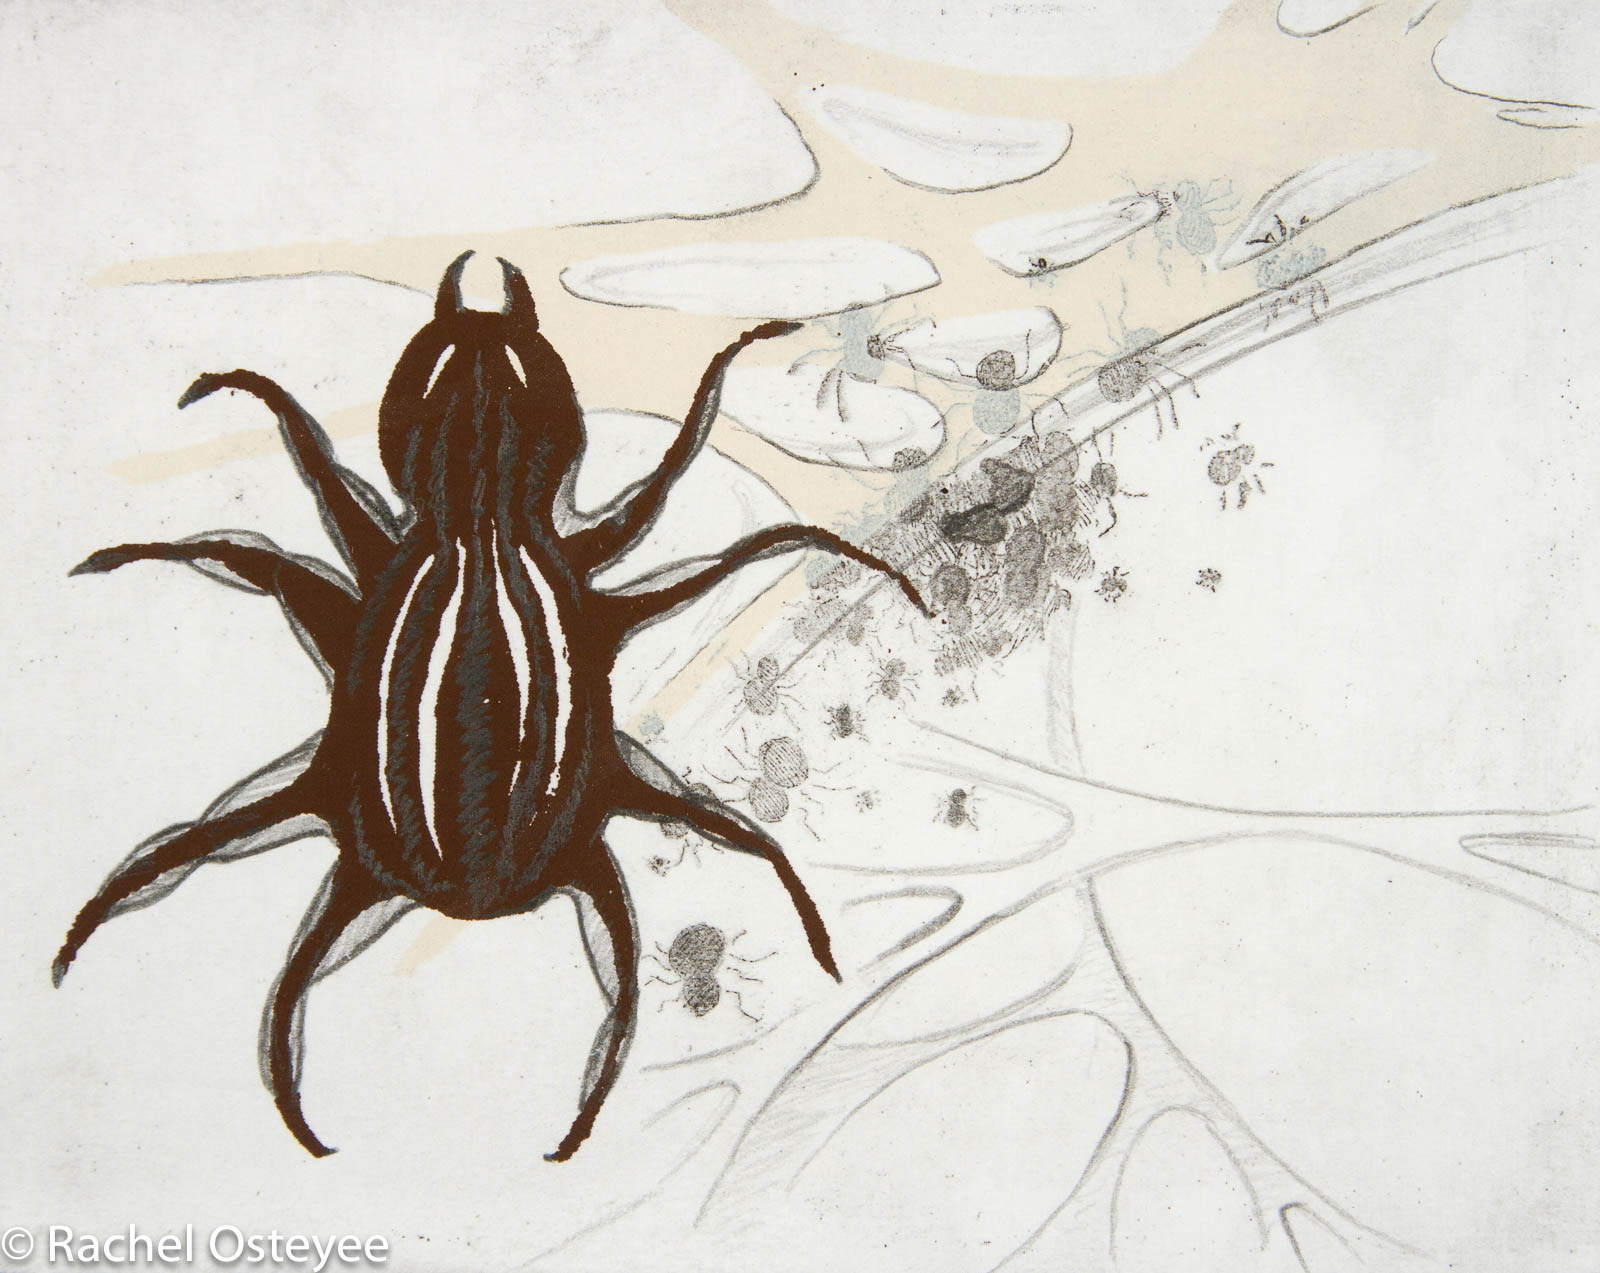 Spider (5" x 4", Etching and Serigraphy)